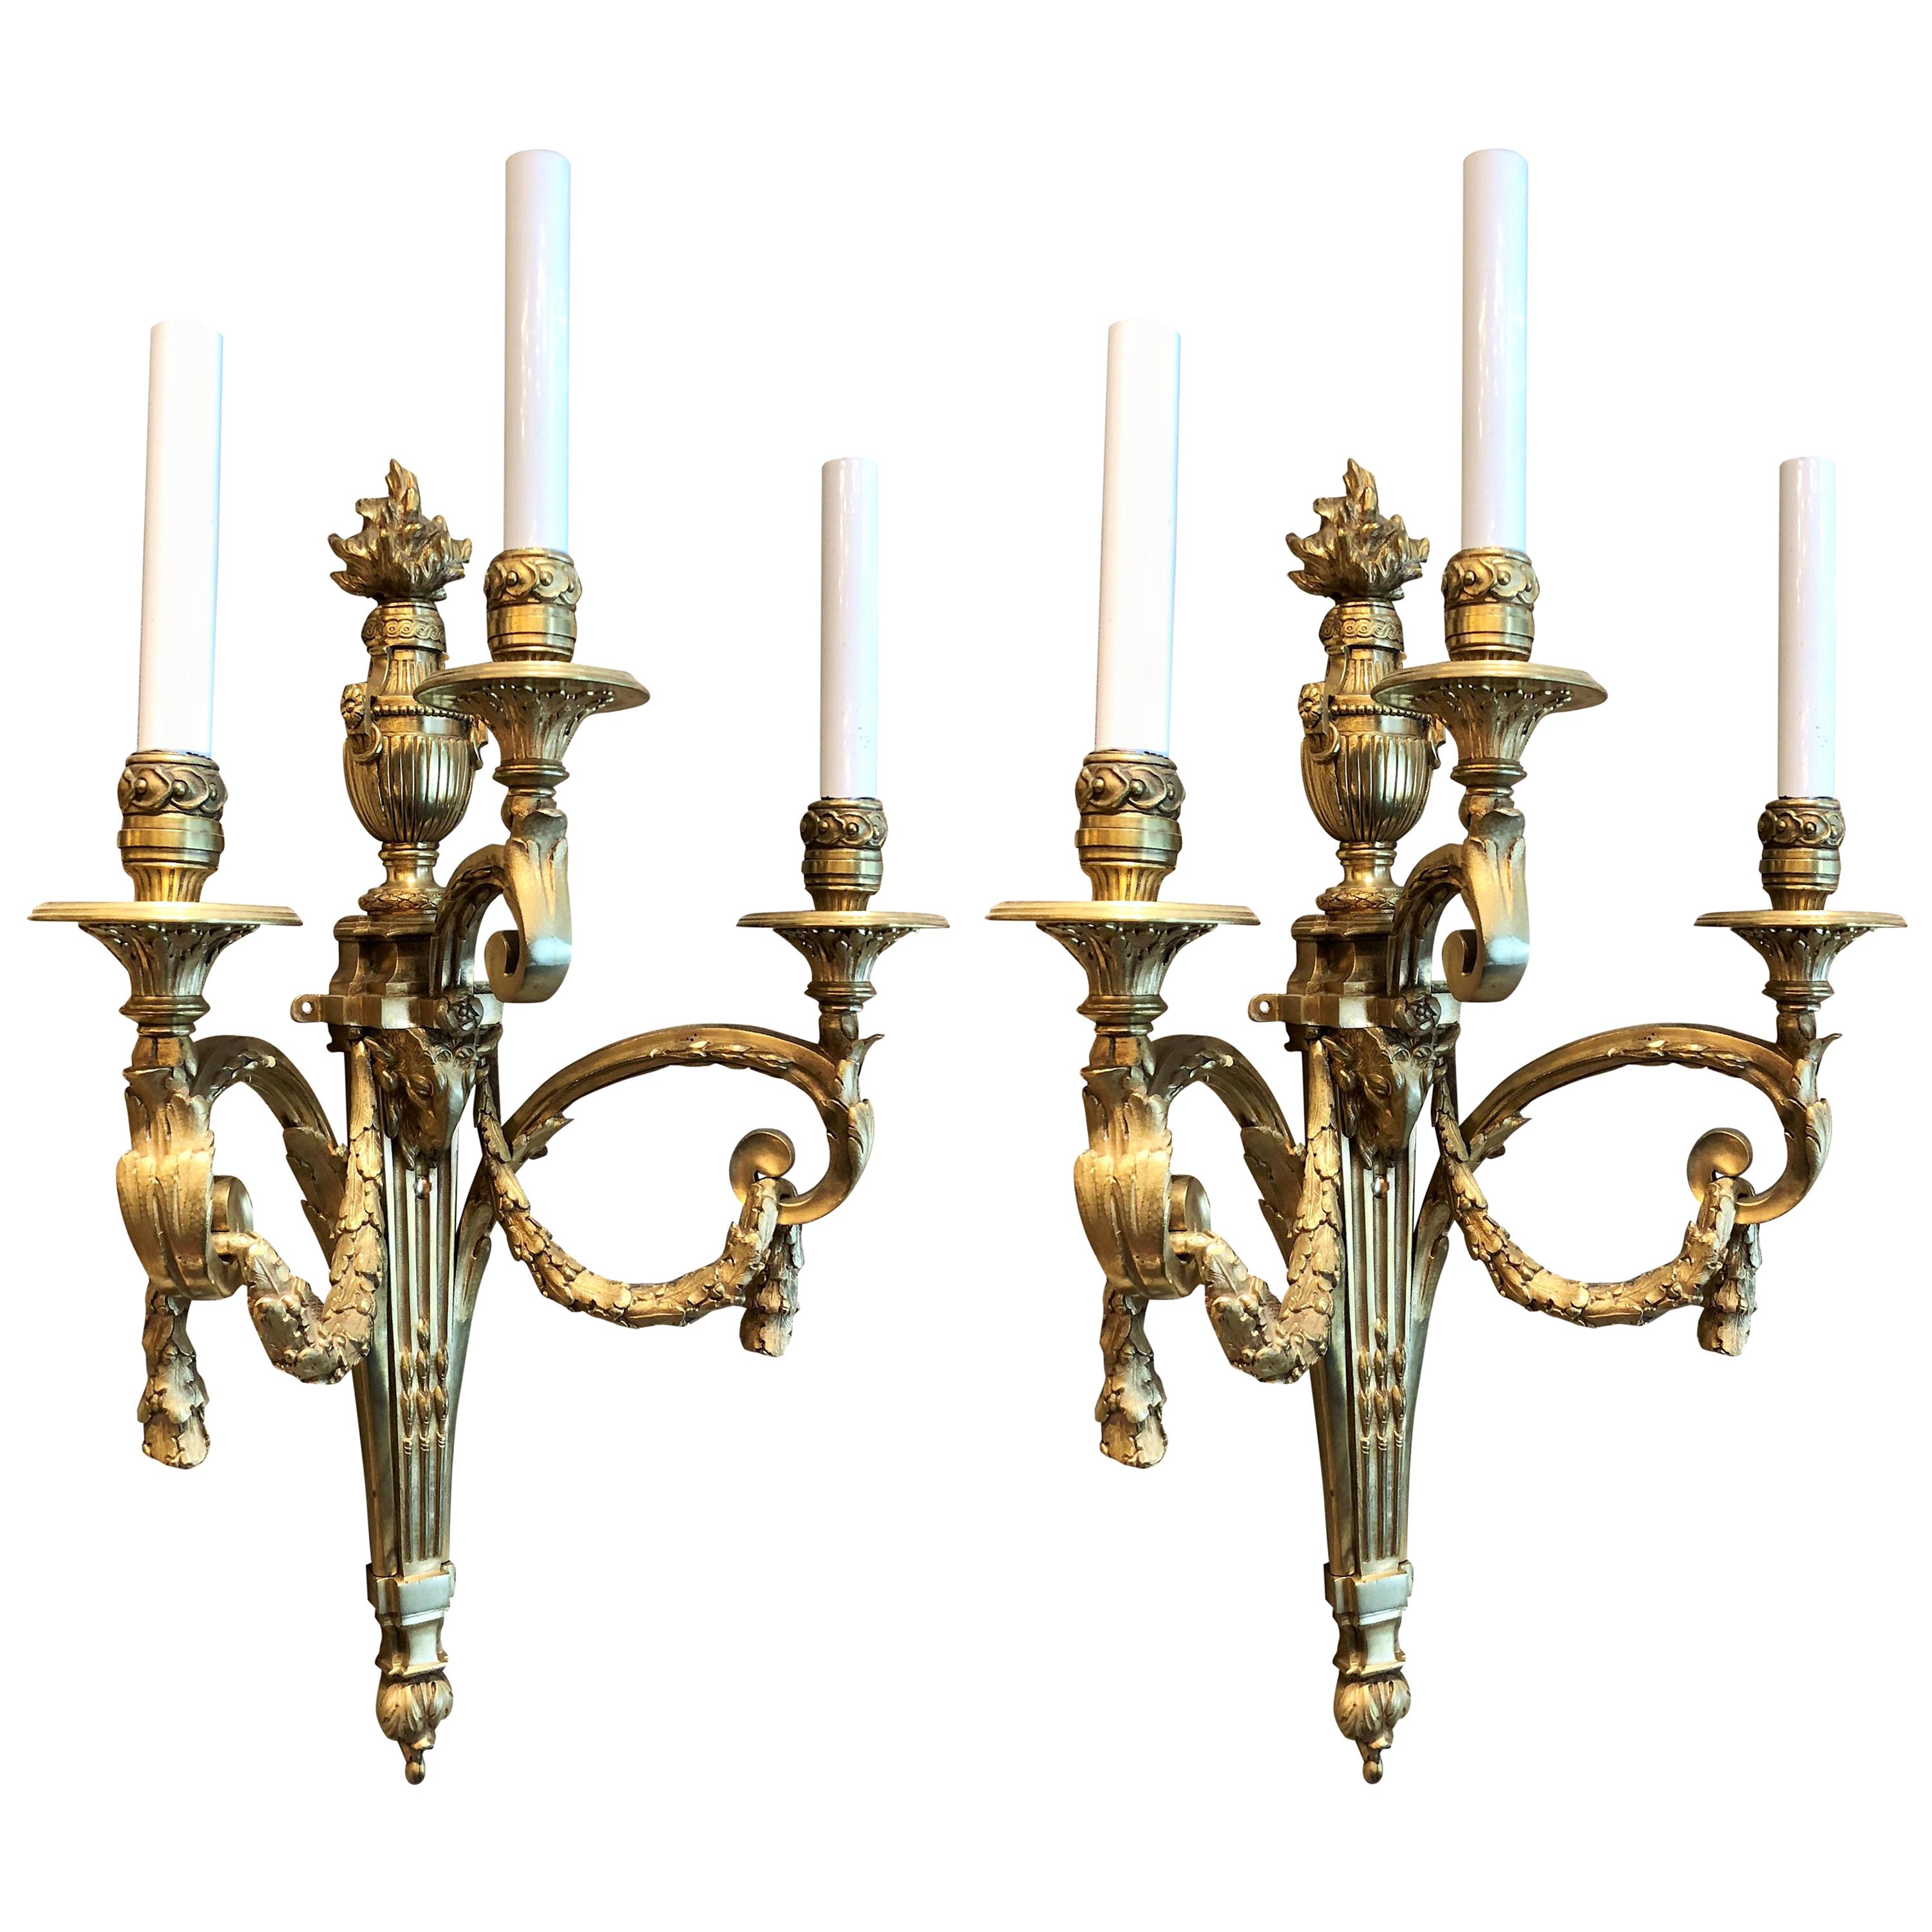 Pair of Antique French Louis XVI Wall Sconces